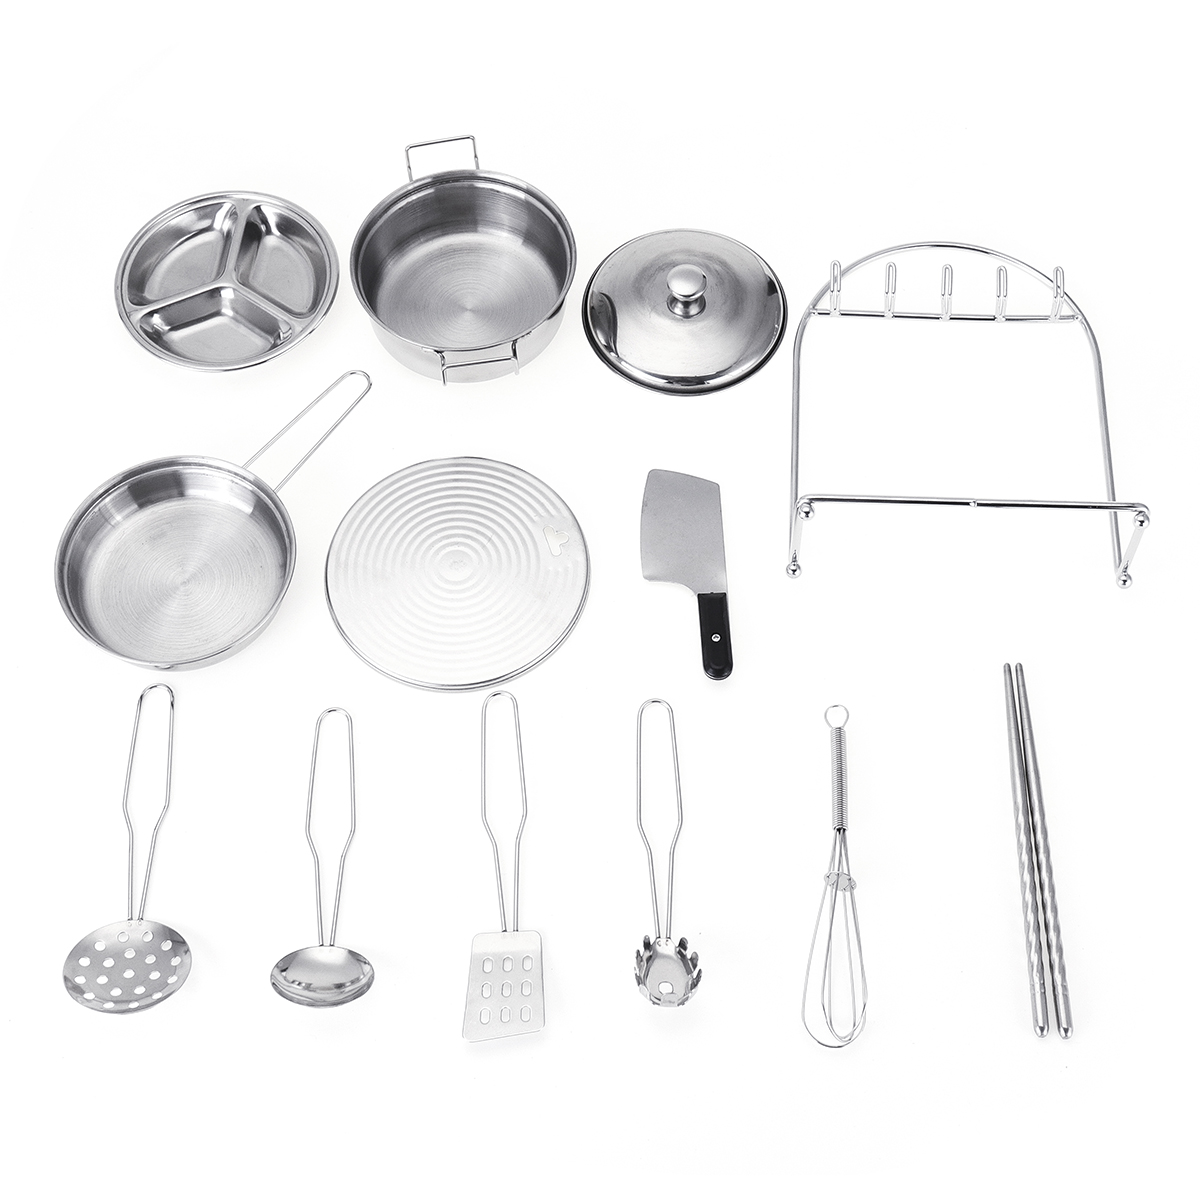 32PCS-Mini-Stainless-Steel-Kitchen-Cutlery-Play-House-Food-Toy-Boiler-Kettle-Cup-Bowl-Spoon-Cookware-1423237-9